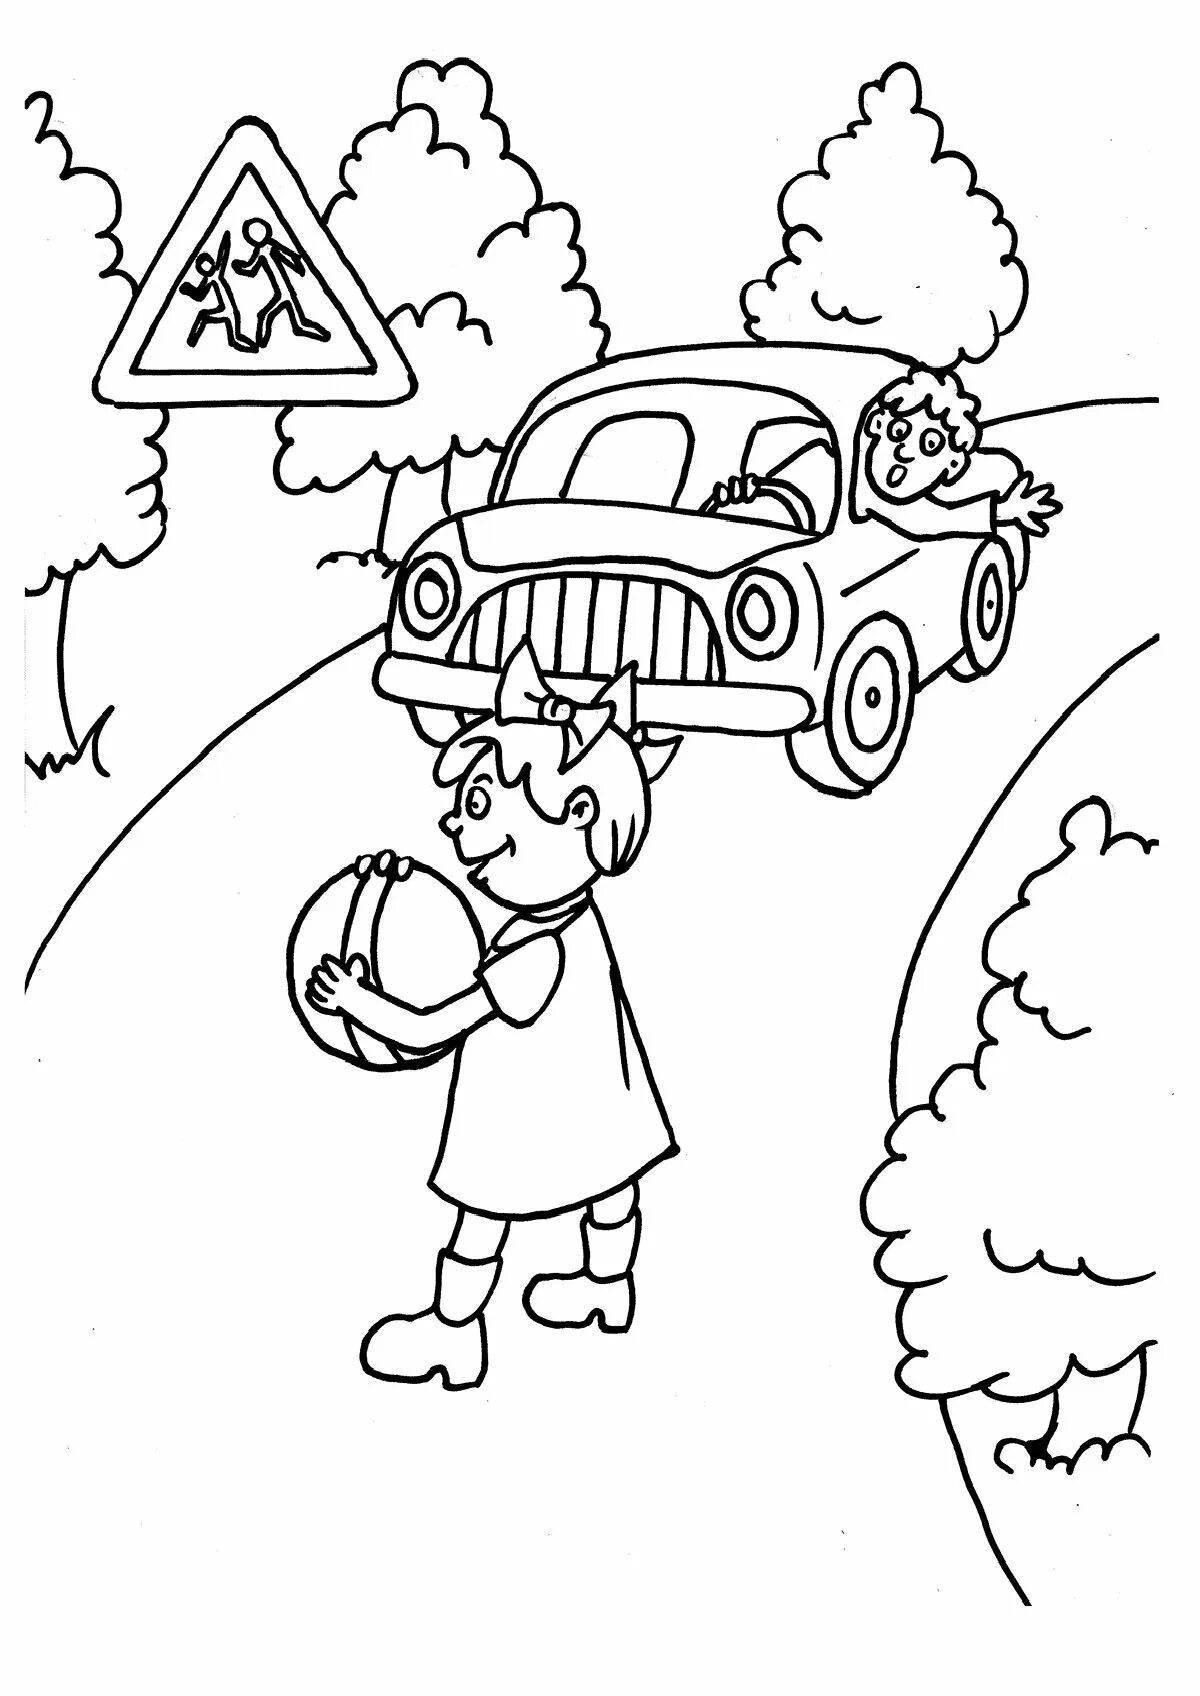 Attractive rules of the road coloring book